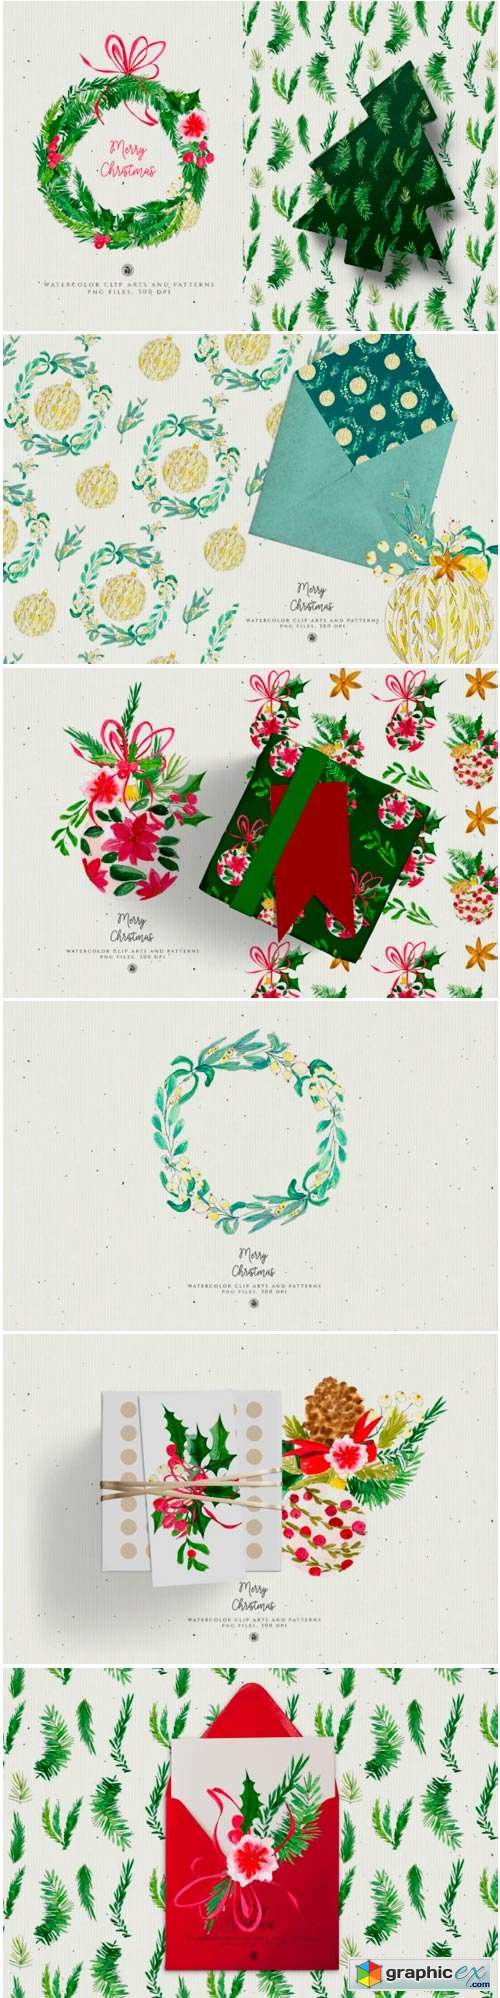 Christmas Watercolor Decorations